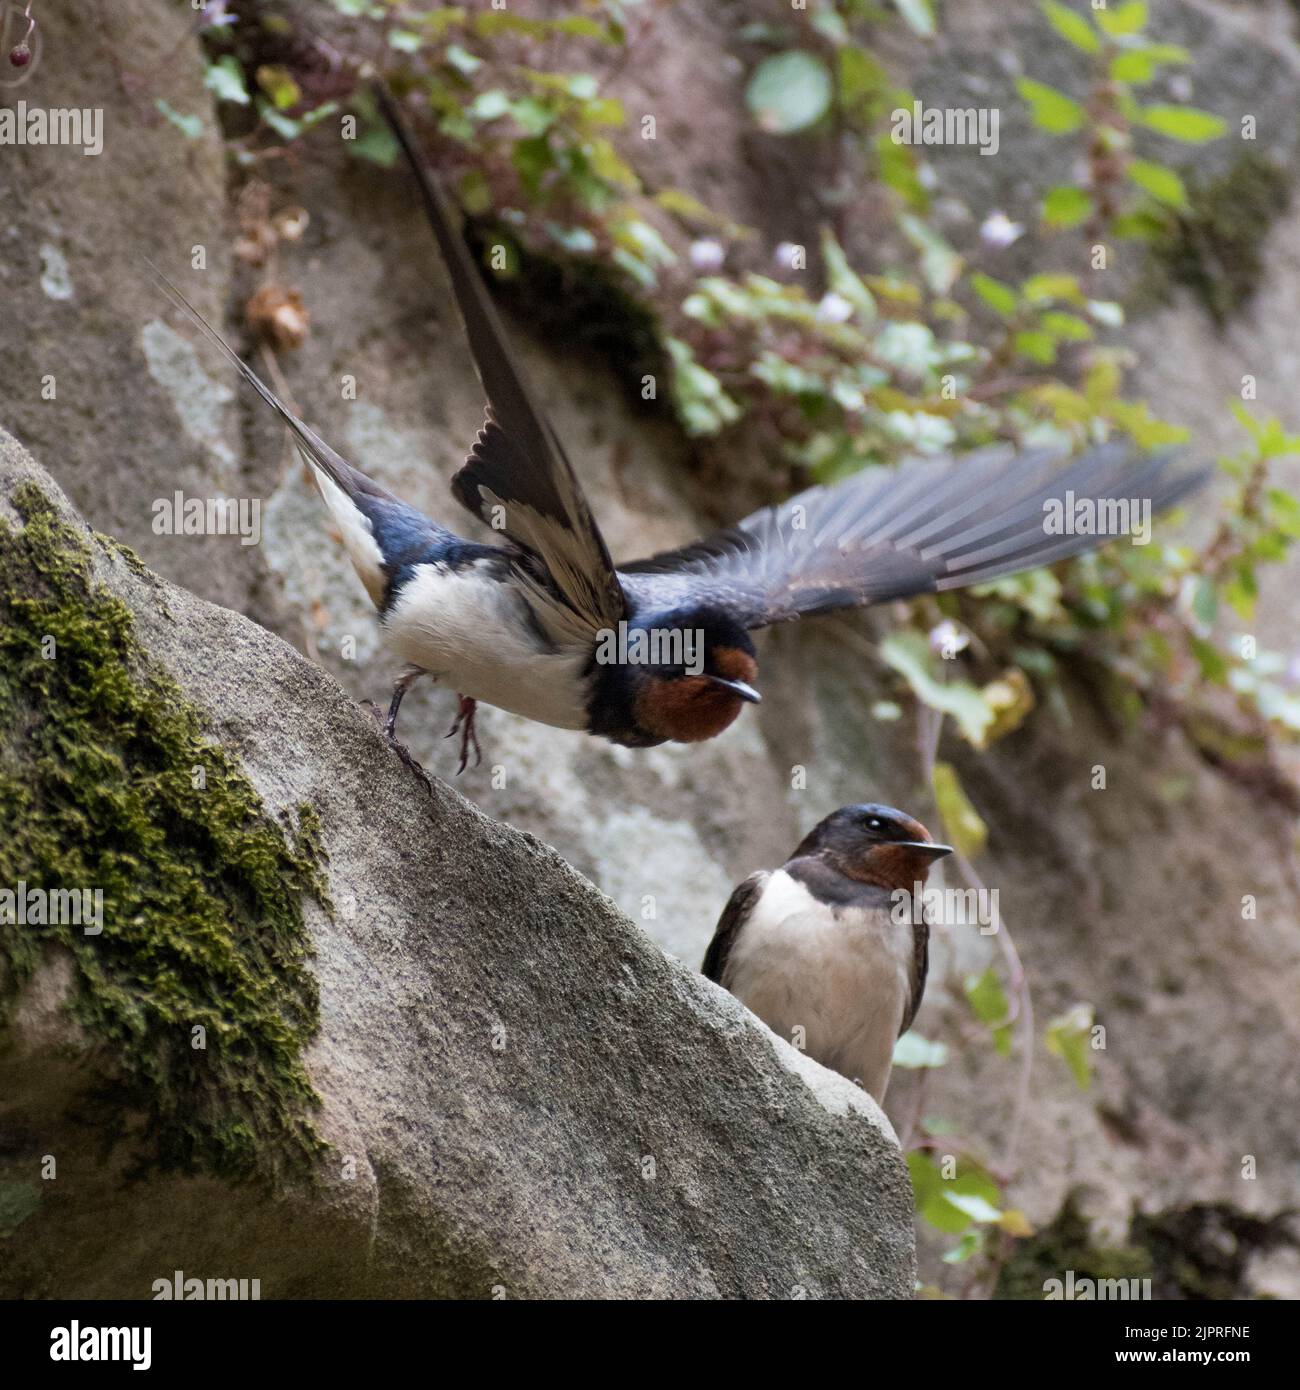 Two swallows at Raglan Castle in Monmouthshire, Wales, Uk.  On stone perch with moss. Stock Photo